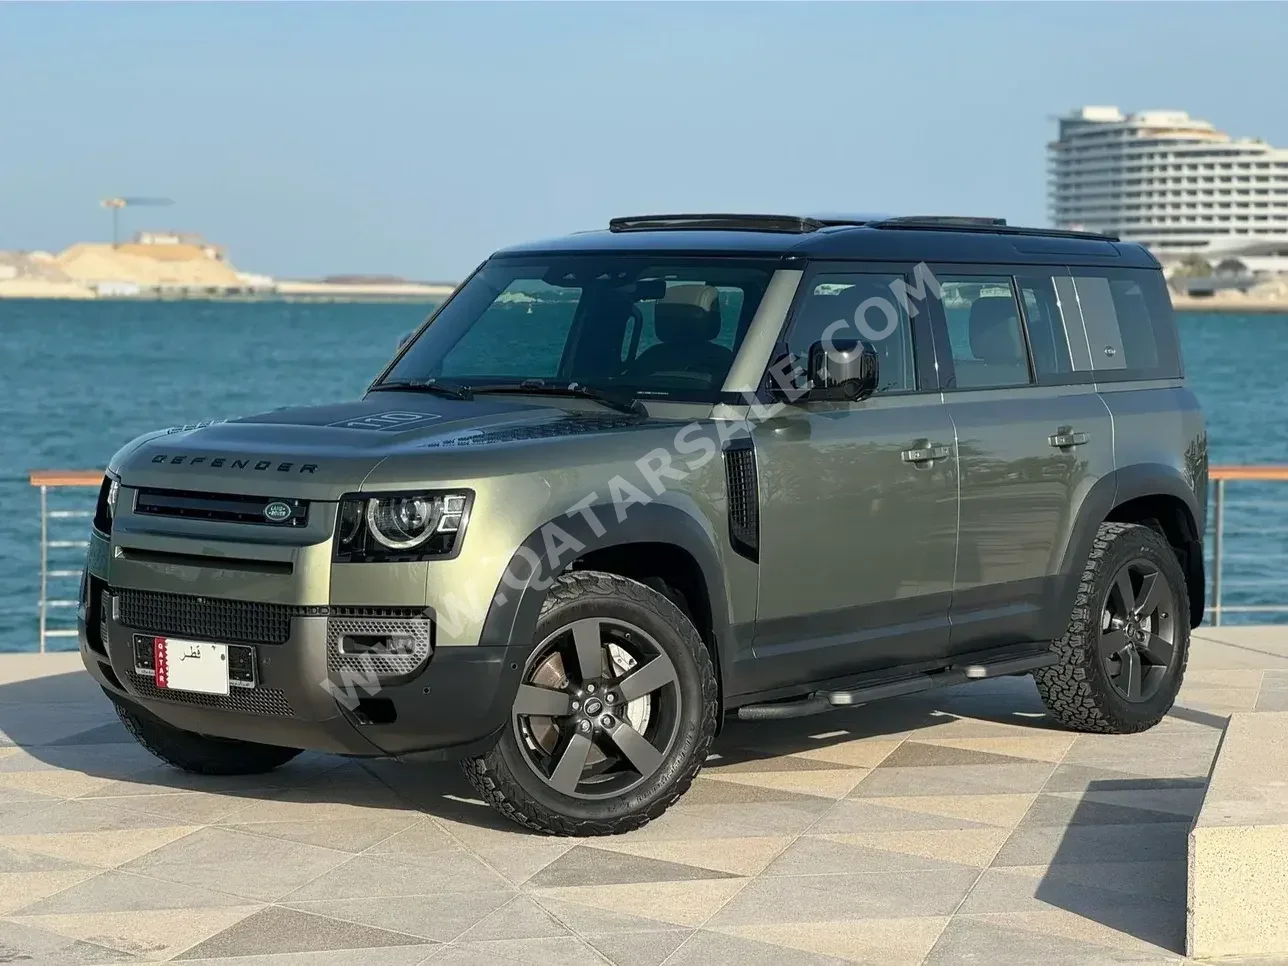  Land Rover  Defender  110 HSE  2022  Automatic  60,000 Km  6 Cylinder  Four Wheel Drive (4WD)  SUV  Olive Green  With Warranty